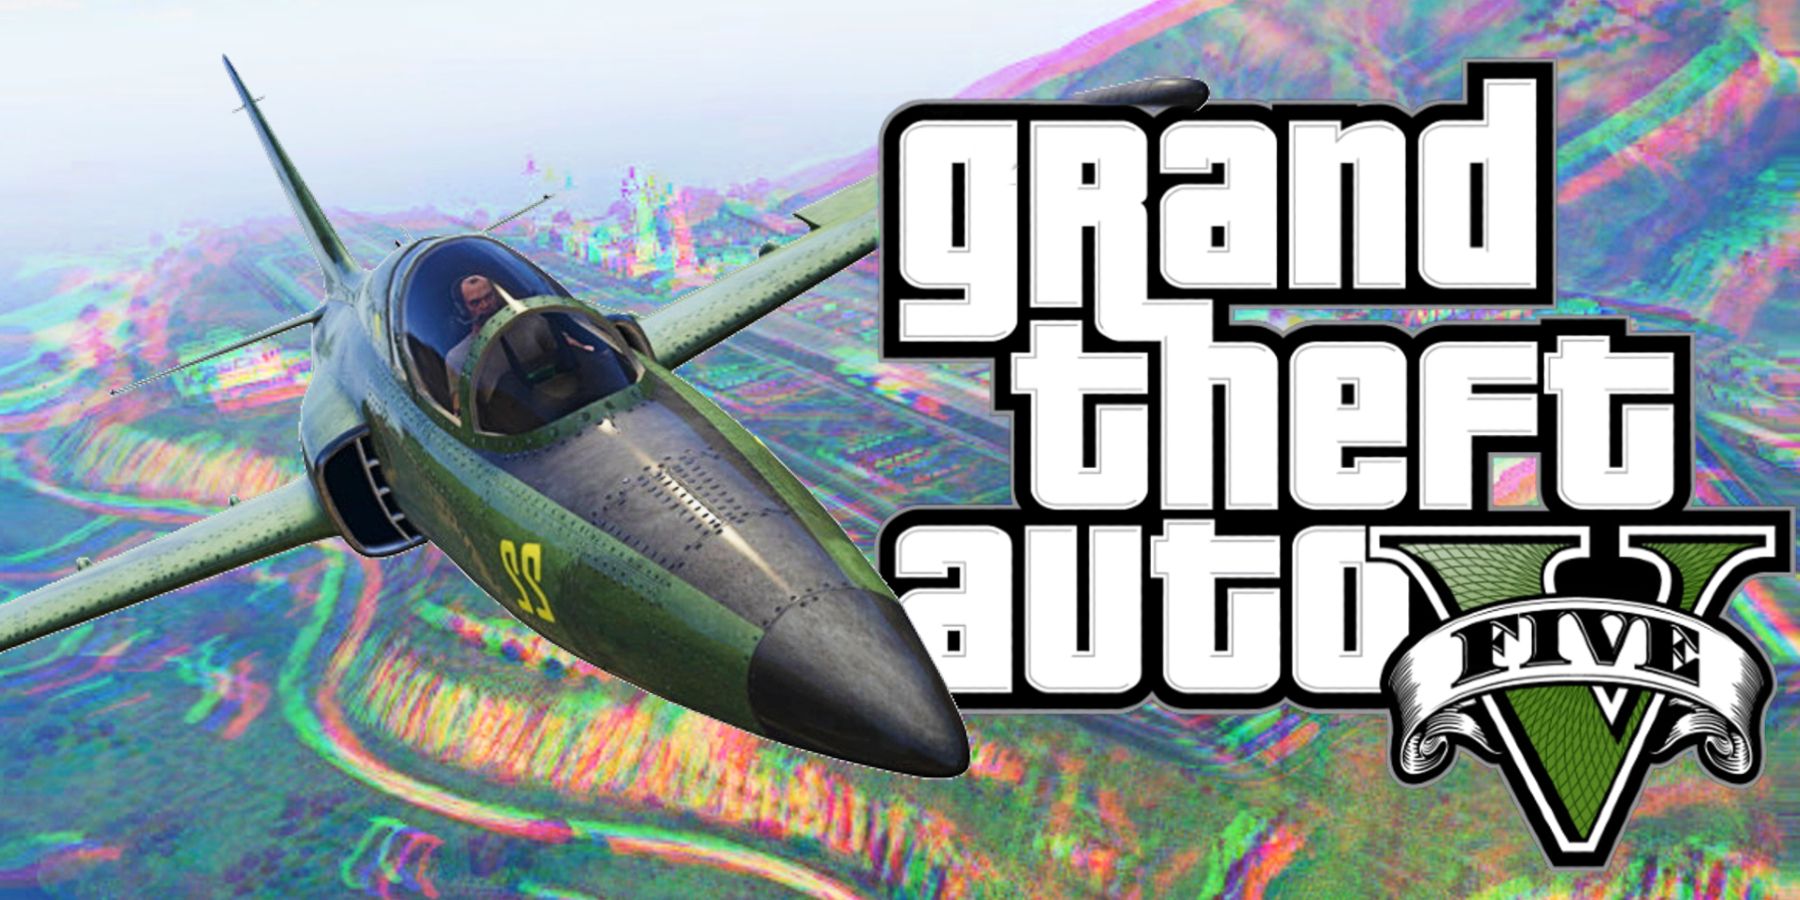 GTA 5 Military Base Location, Map and How to Access Fort Zancudo